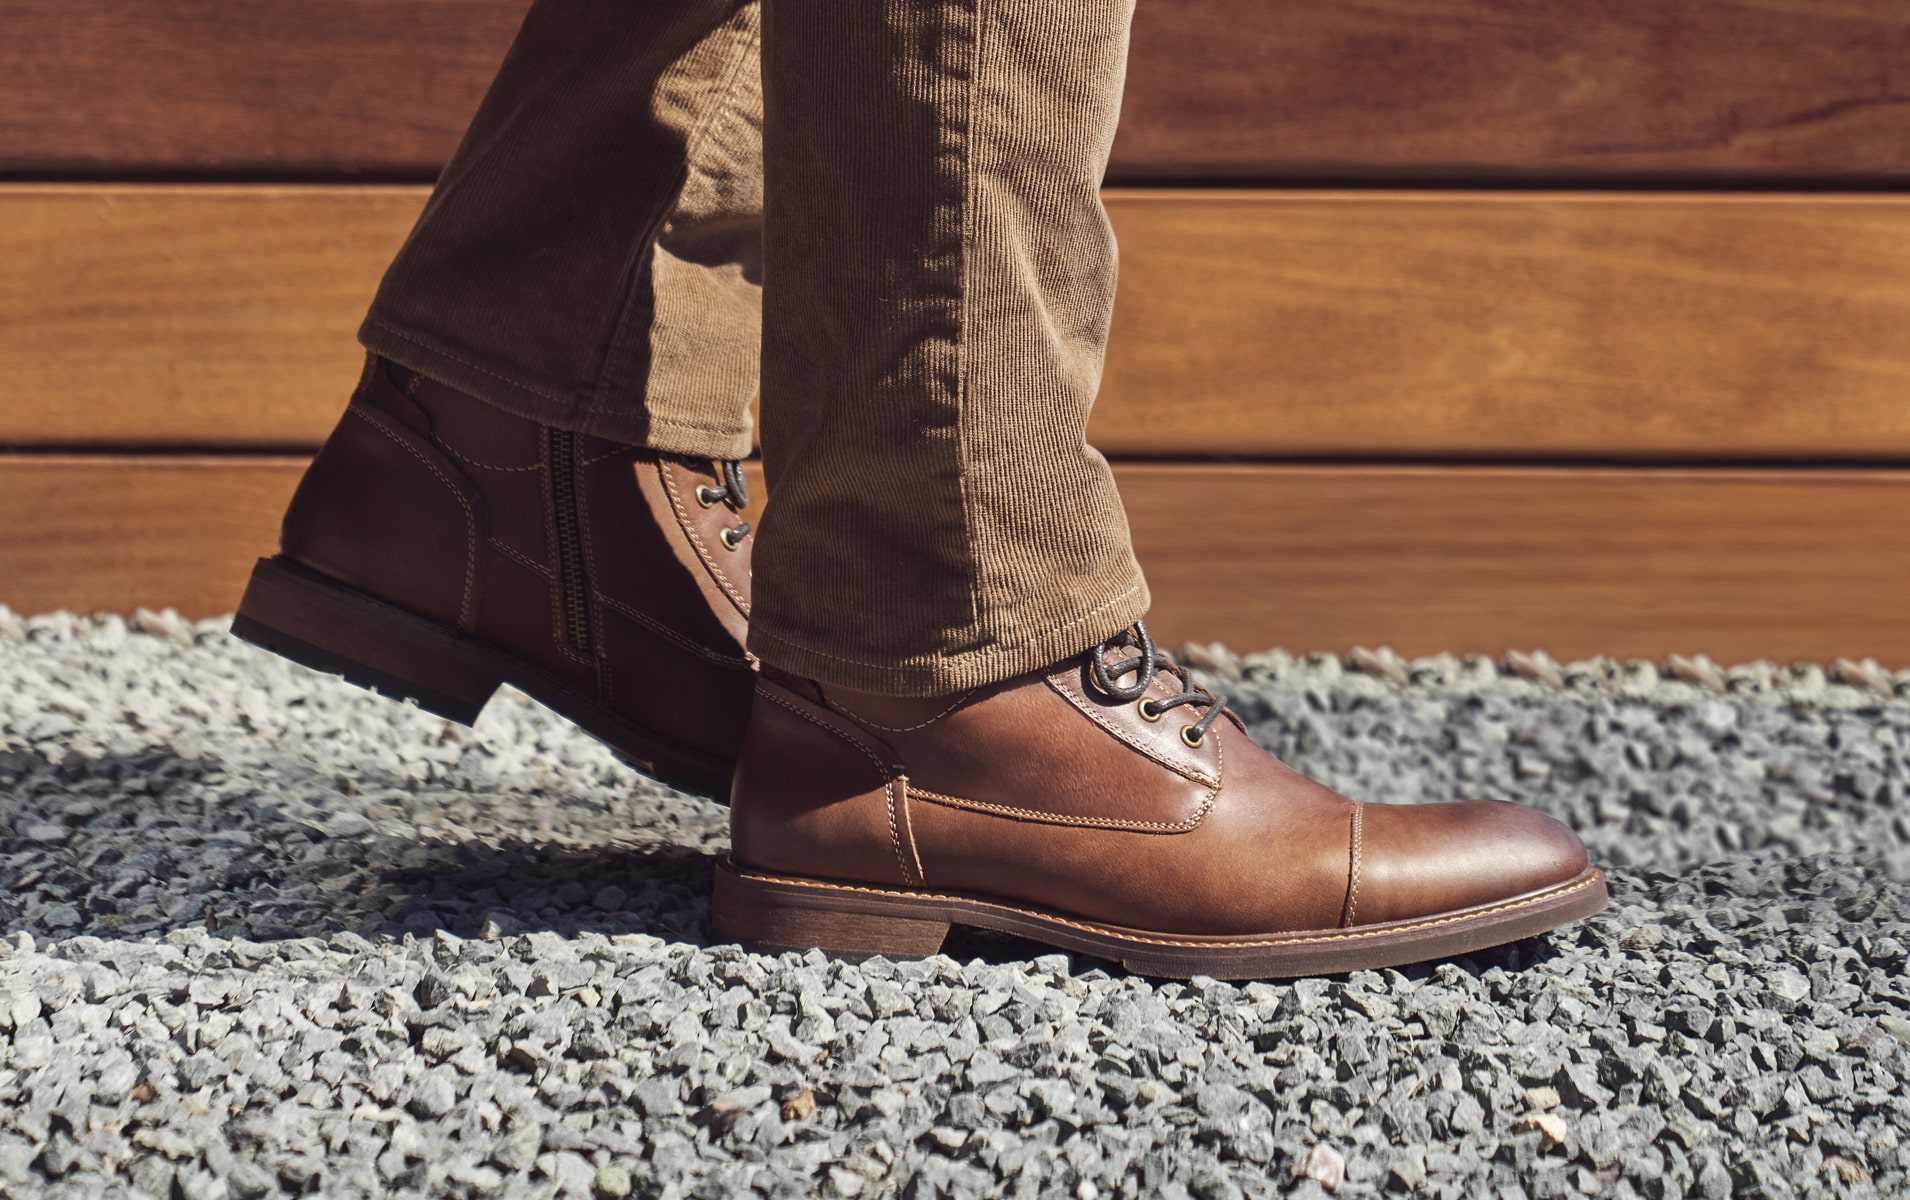 Click to shop Florsheim boots. Image features the Lodge cap toe lace up boot in brown.